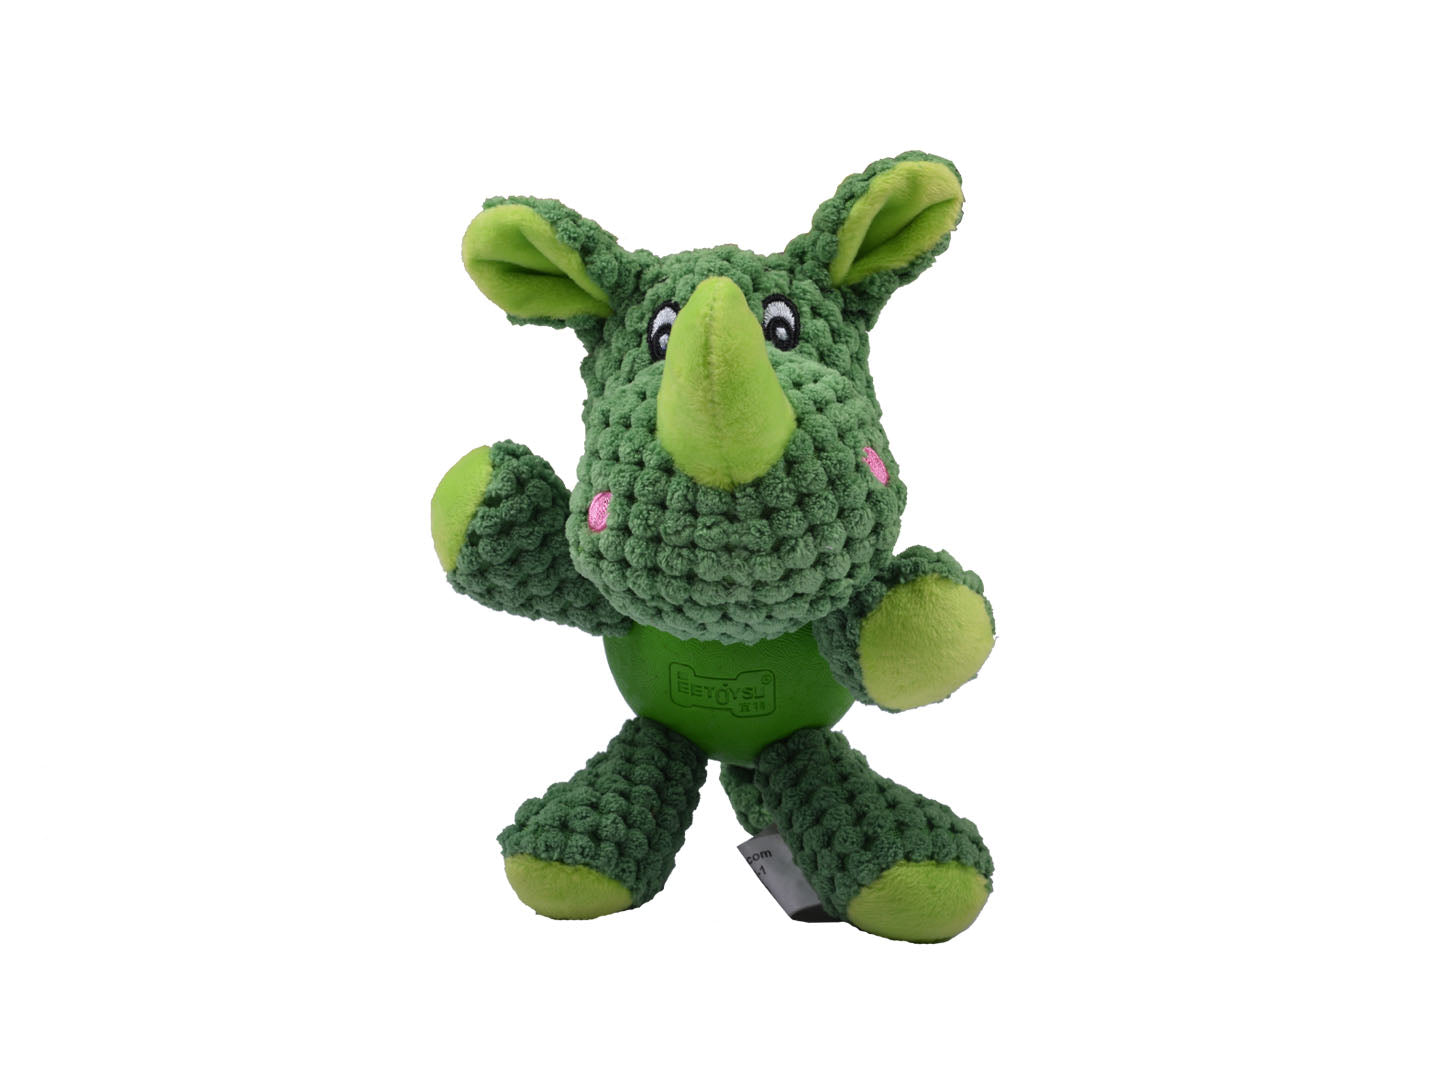 "Rawhorn The Rhino" Plush Dog Toy For Puppies And Gentle Chewers